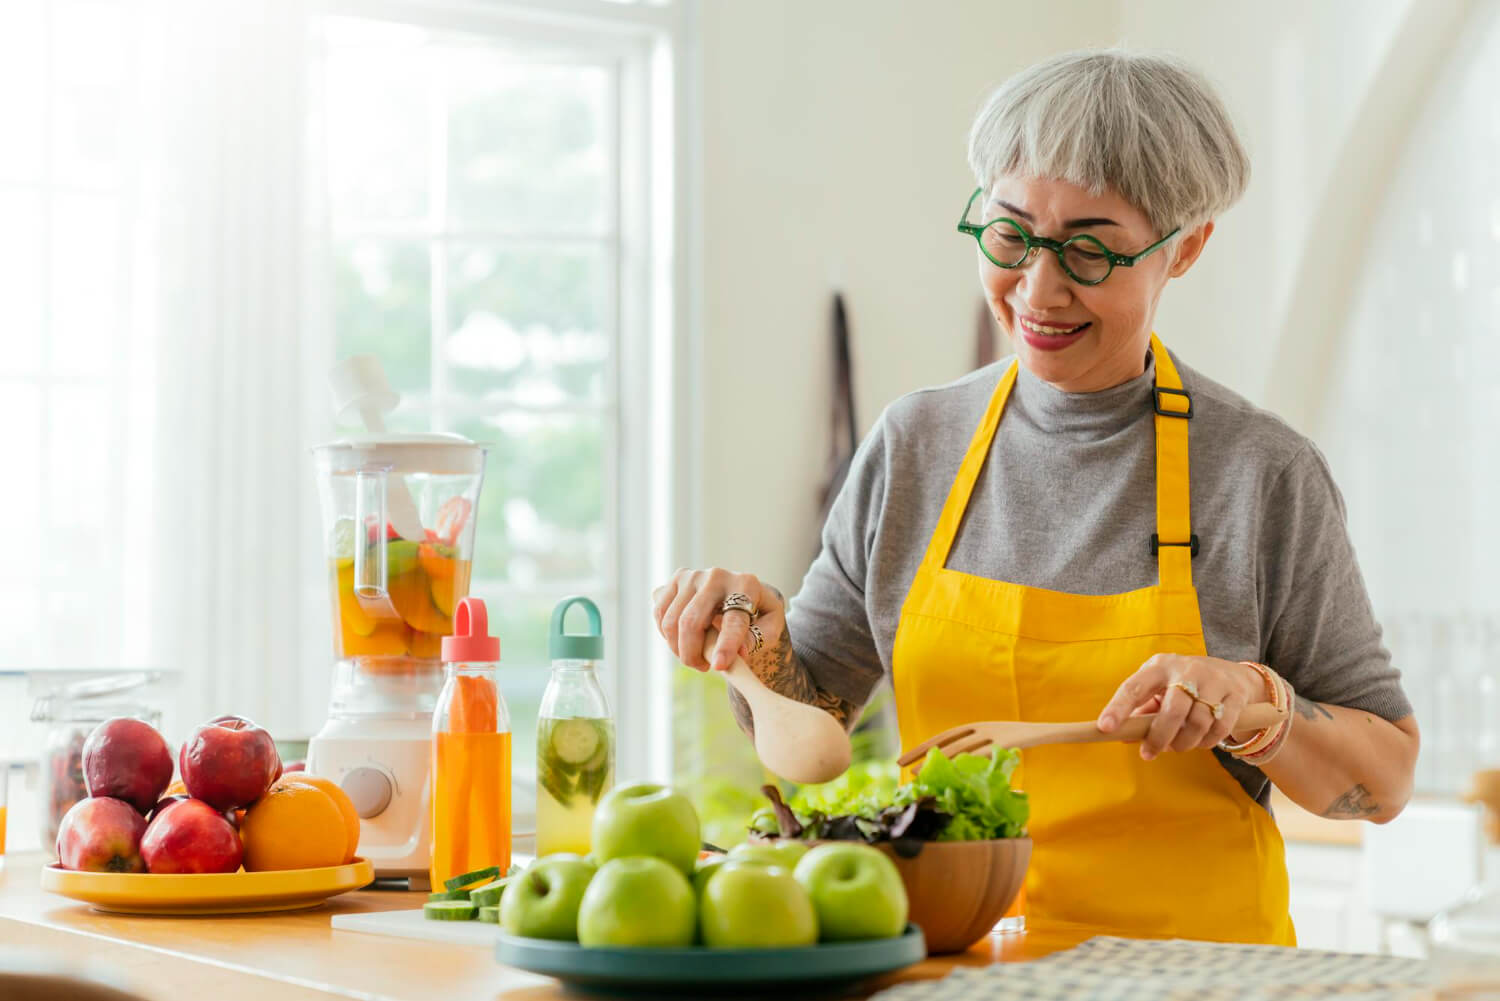 mature-smiling-tattoo-woman-eating-salad-fruits-vegetables-attractive-mature-woman-with-fresh-green-fruit-salad-home-senior-woman-apron-standing-kitchen-counter-relaxing-house